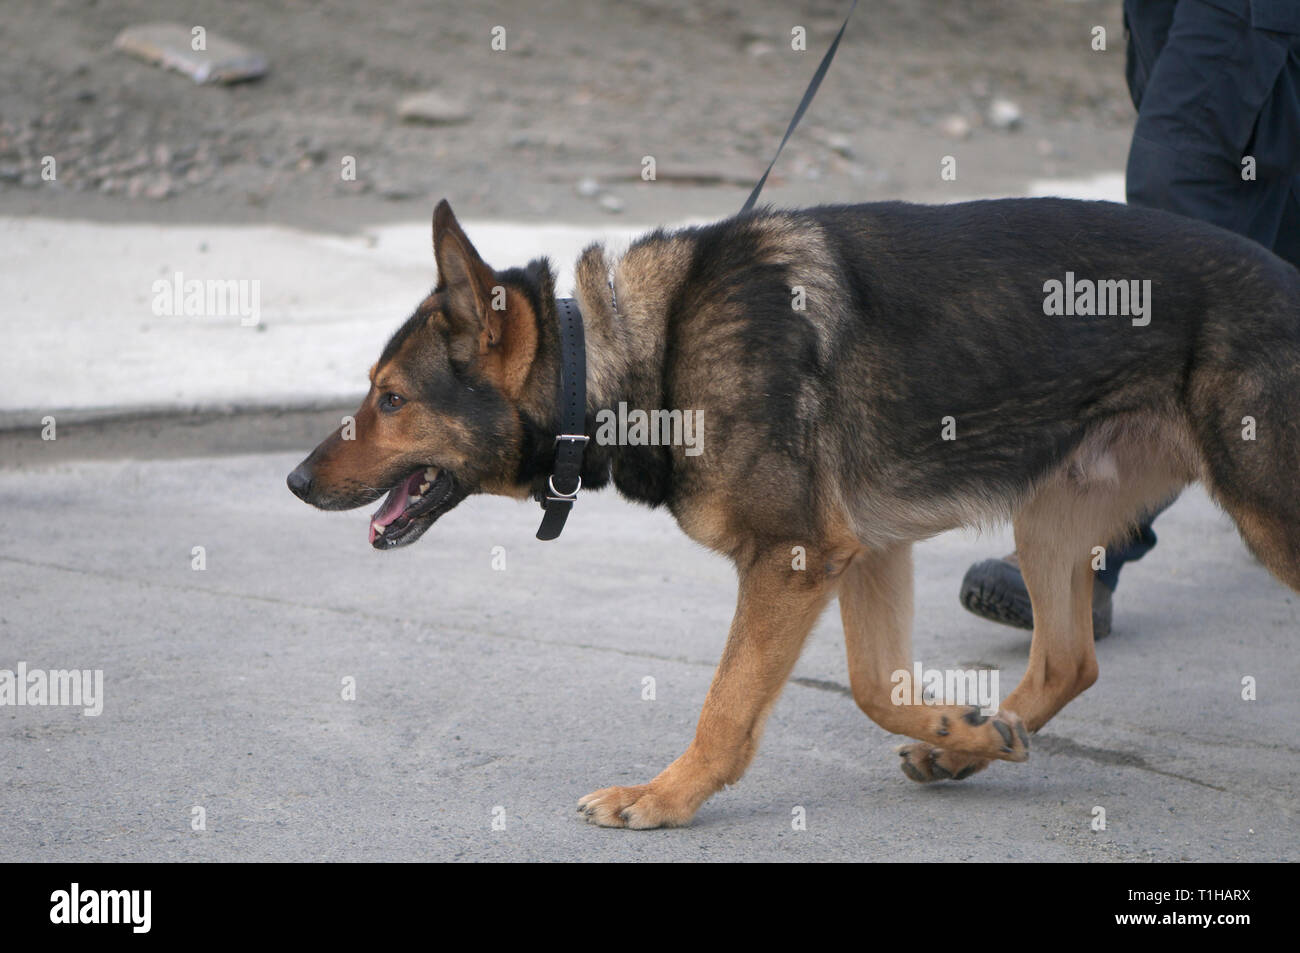 Maple Ridge, B. C. March 25, 2019. Canadian Prime Minister Justin Trudeau to address the media about affordable housing.  Police dog on site. Stock Photo